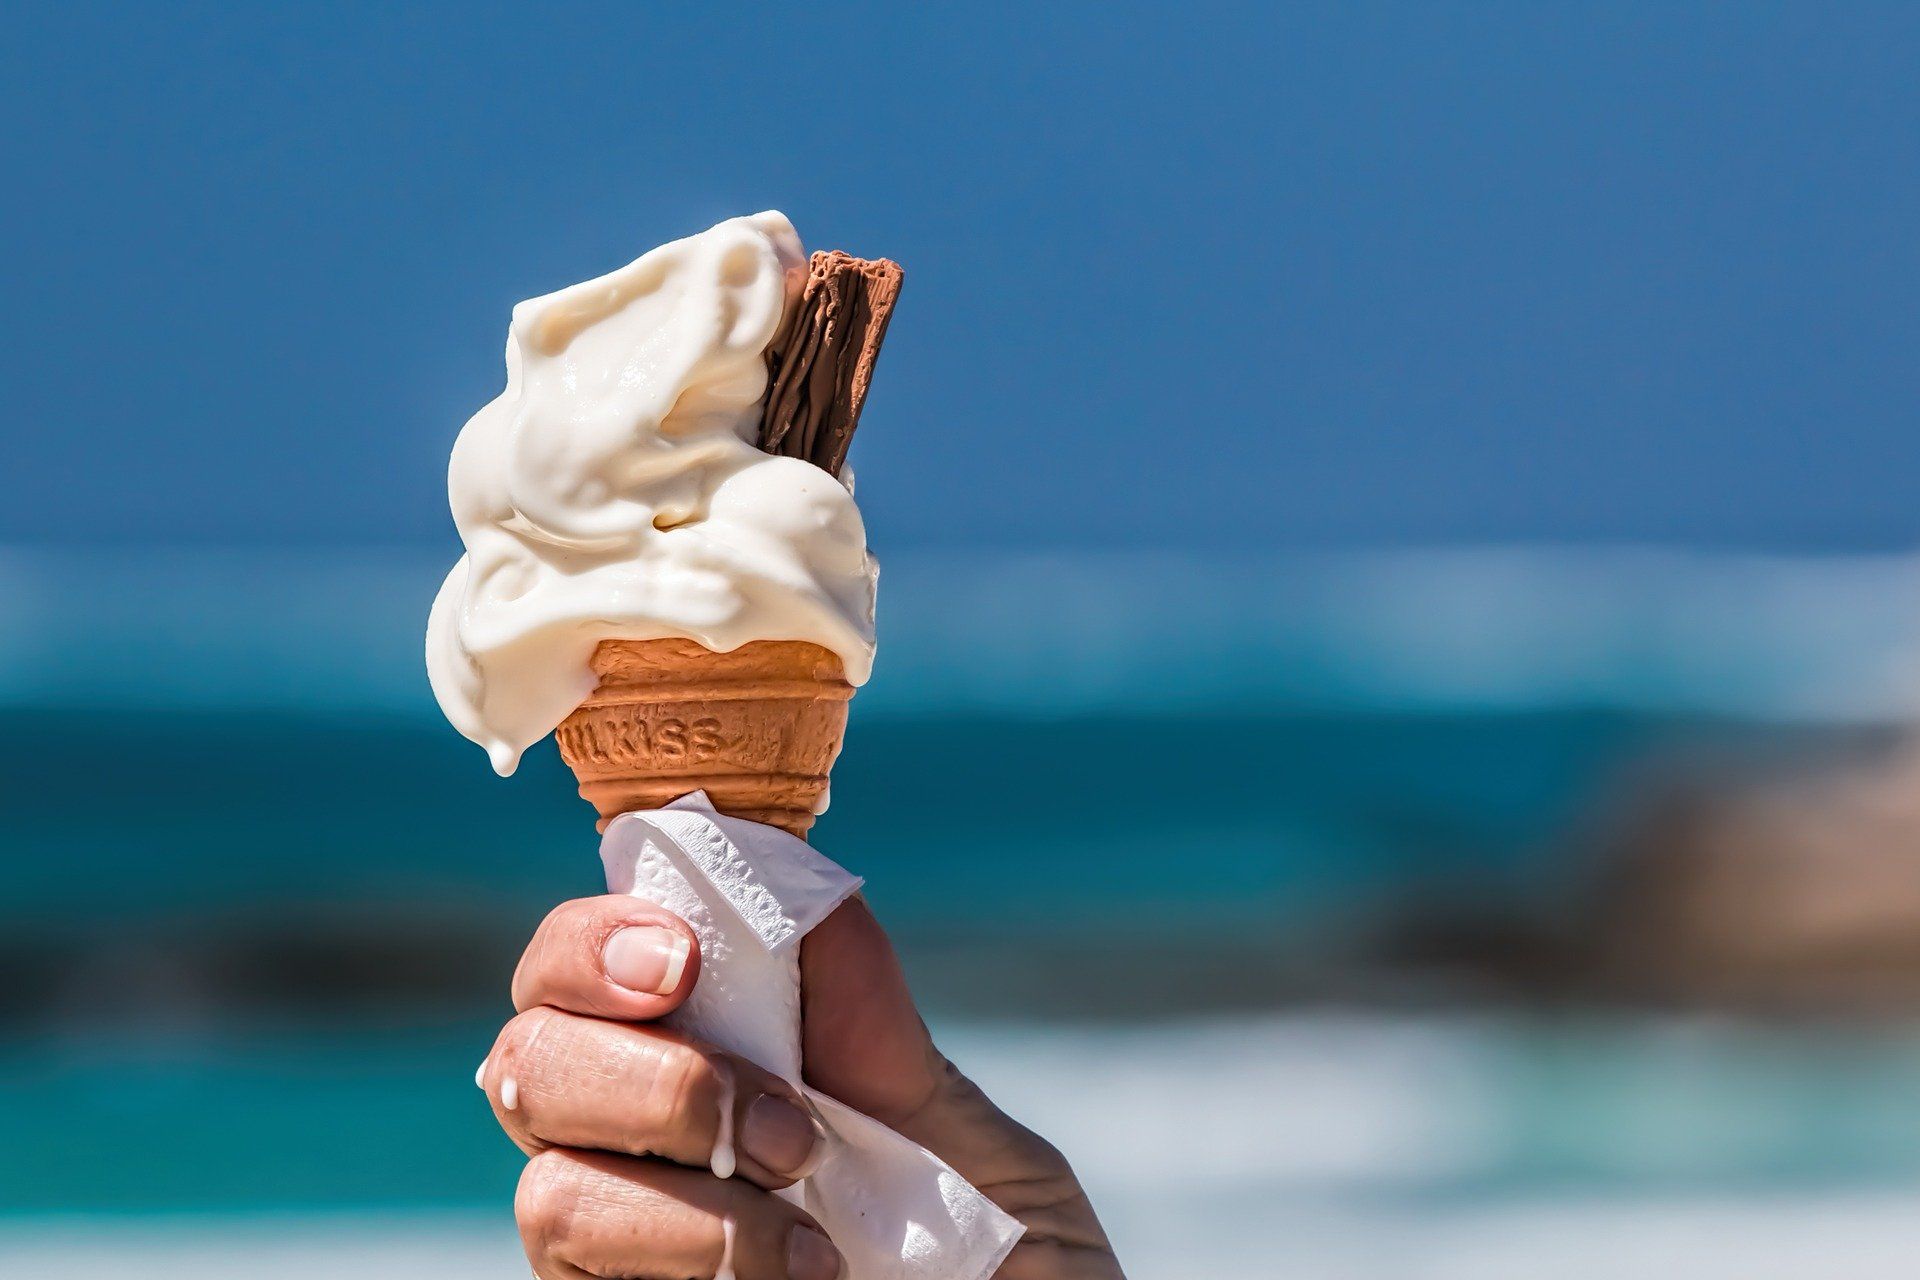 Top ice cream brand names are created to highlight the unique flavors to the world.